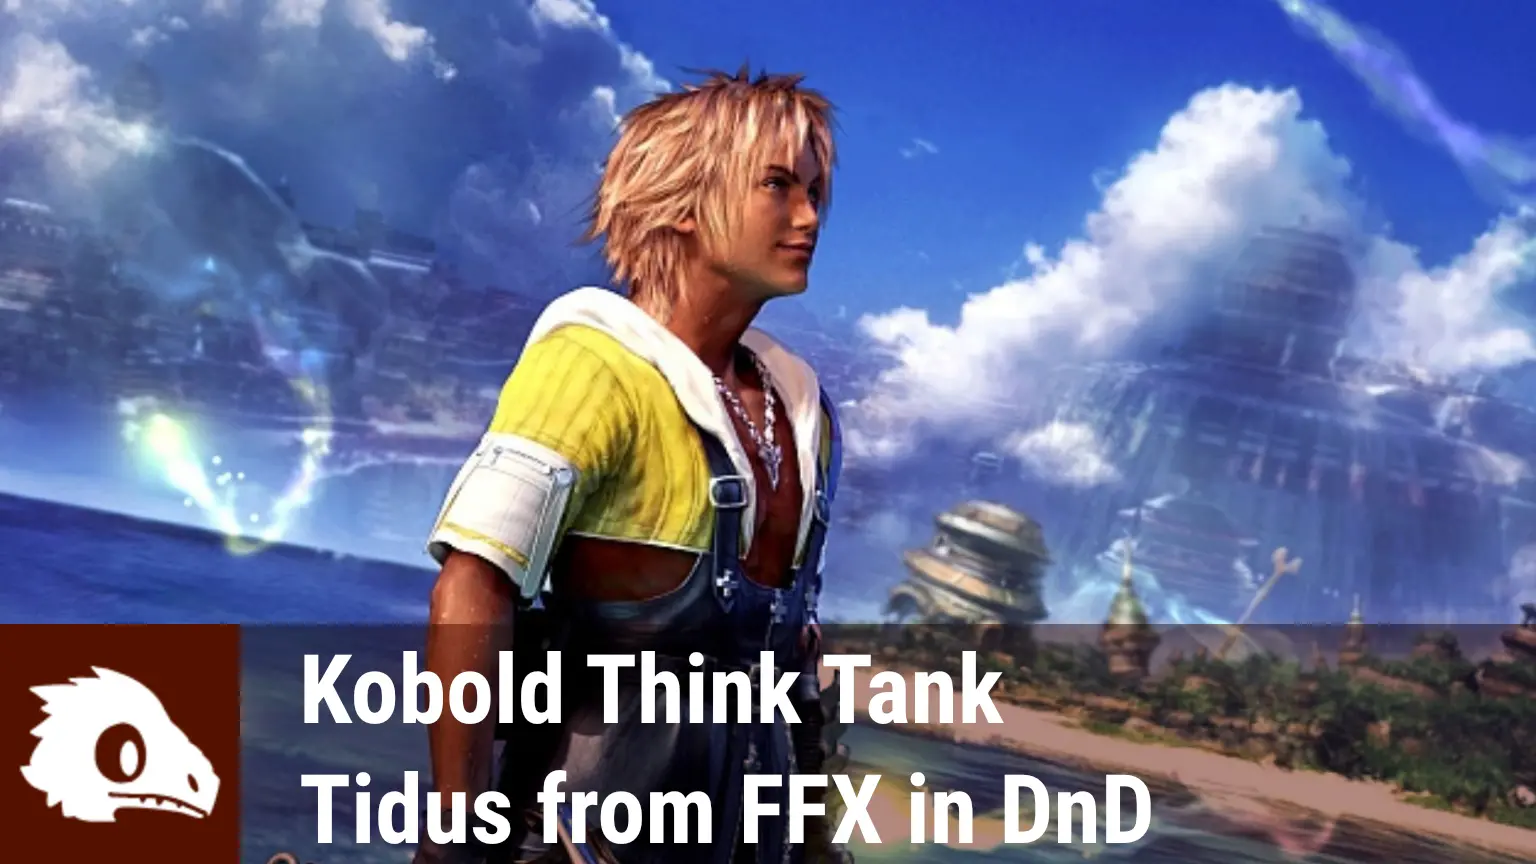 Graphic of Tidus from Final Fantasy X